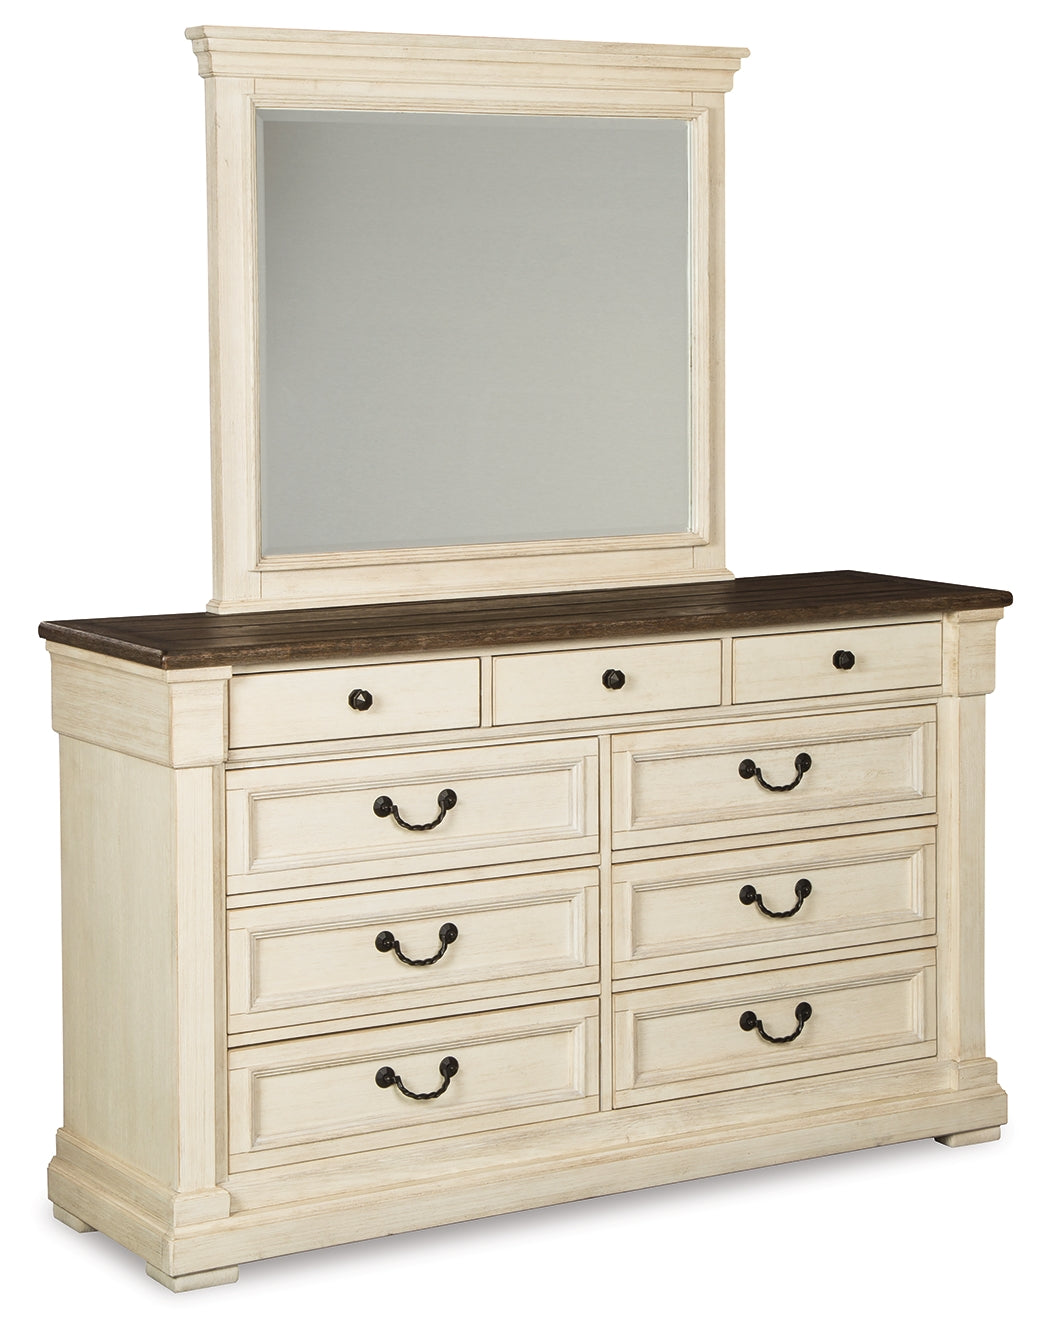 Bolanburg White King Panel Bedroom Set with Dresser, Mirror, Chest and 2 Nightstands